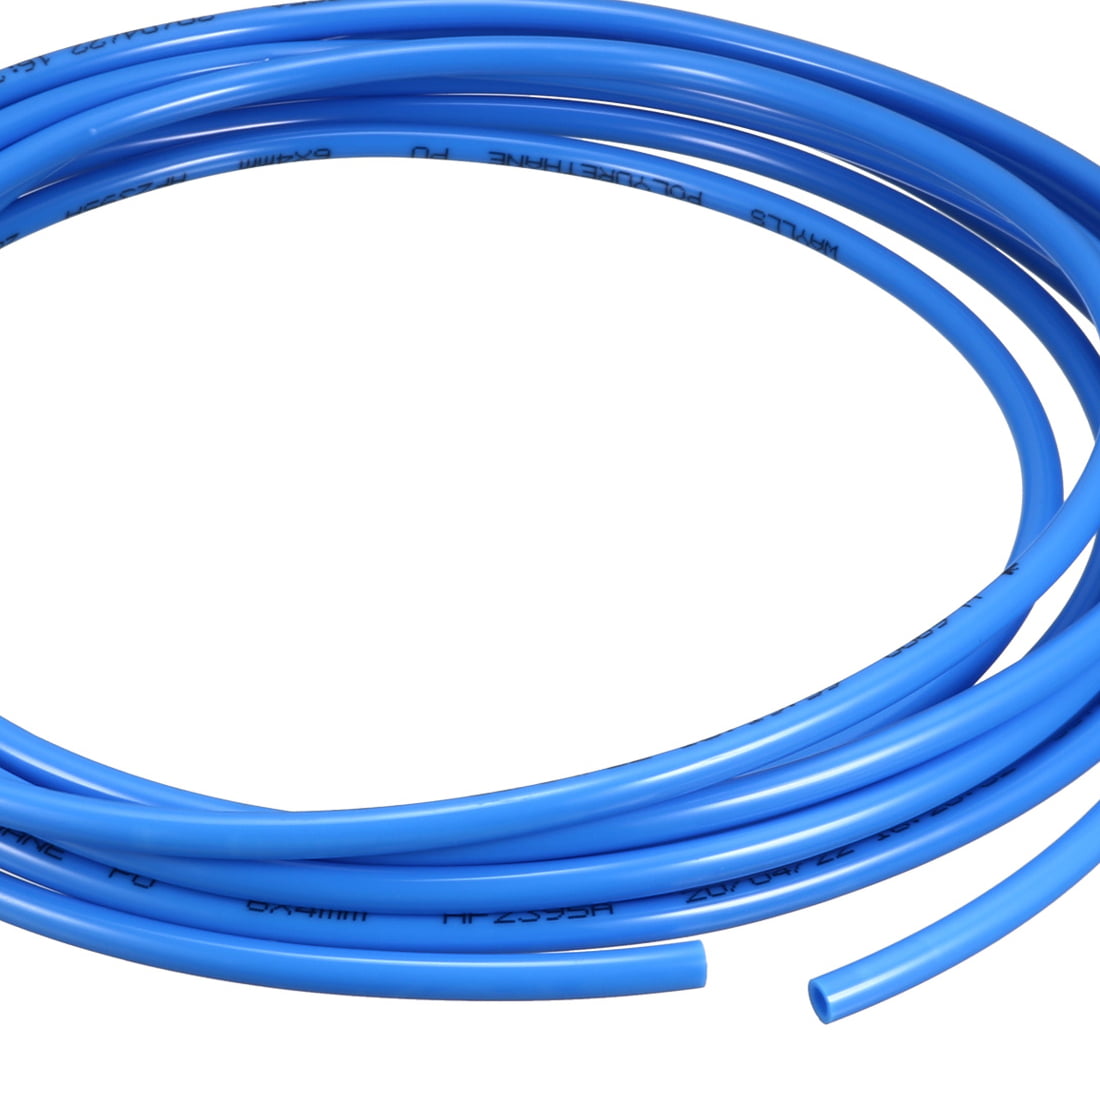 6mm OD 4mm ID Sydien 20 Meters 65.6 Ft Pneumatic Polyurethane for Fluid Transfer Pneumatic Tubing Or Air Line Tubing PU Hose Tube Pipe Blue 